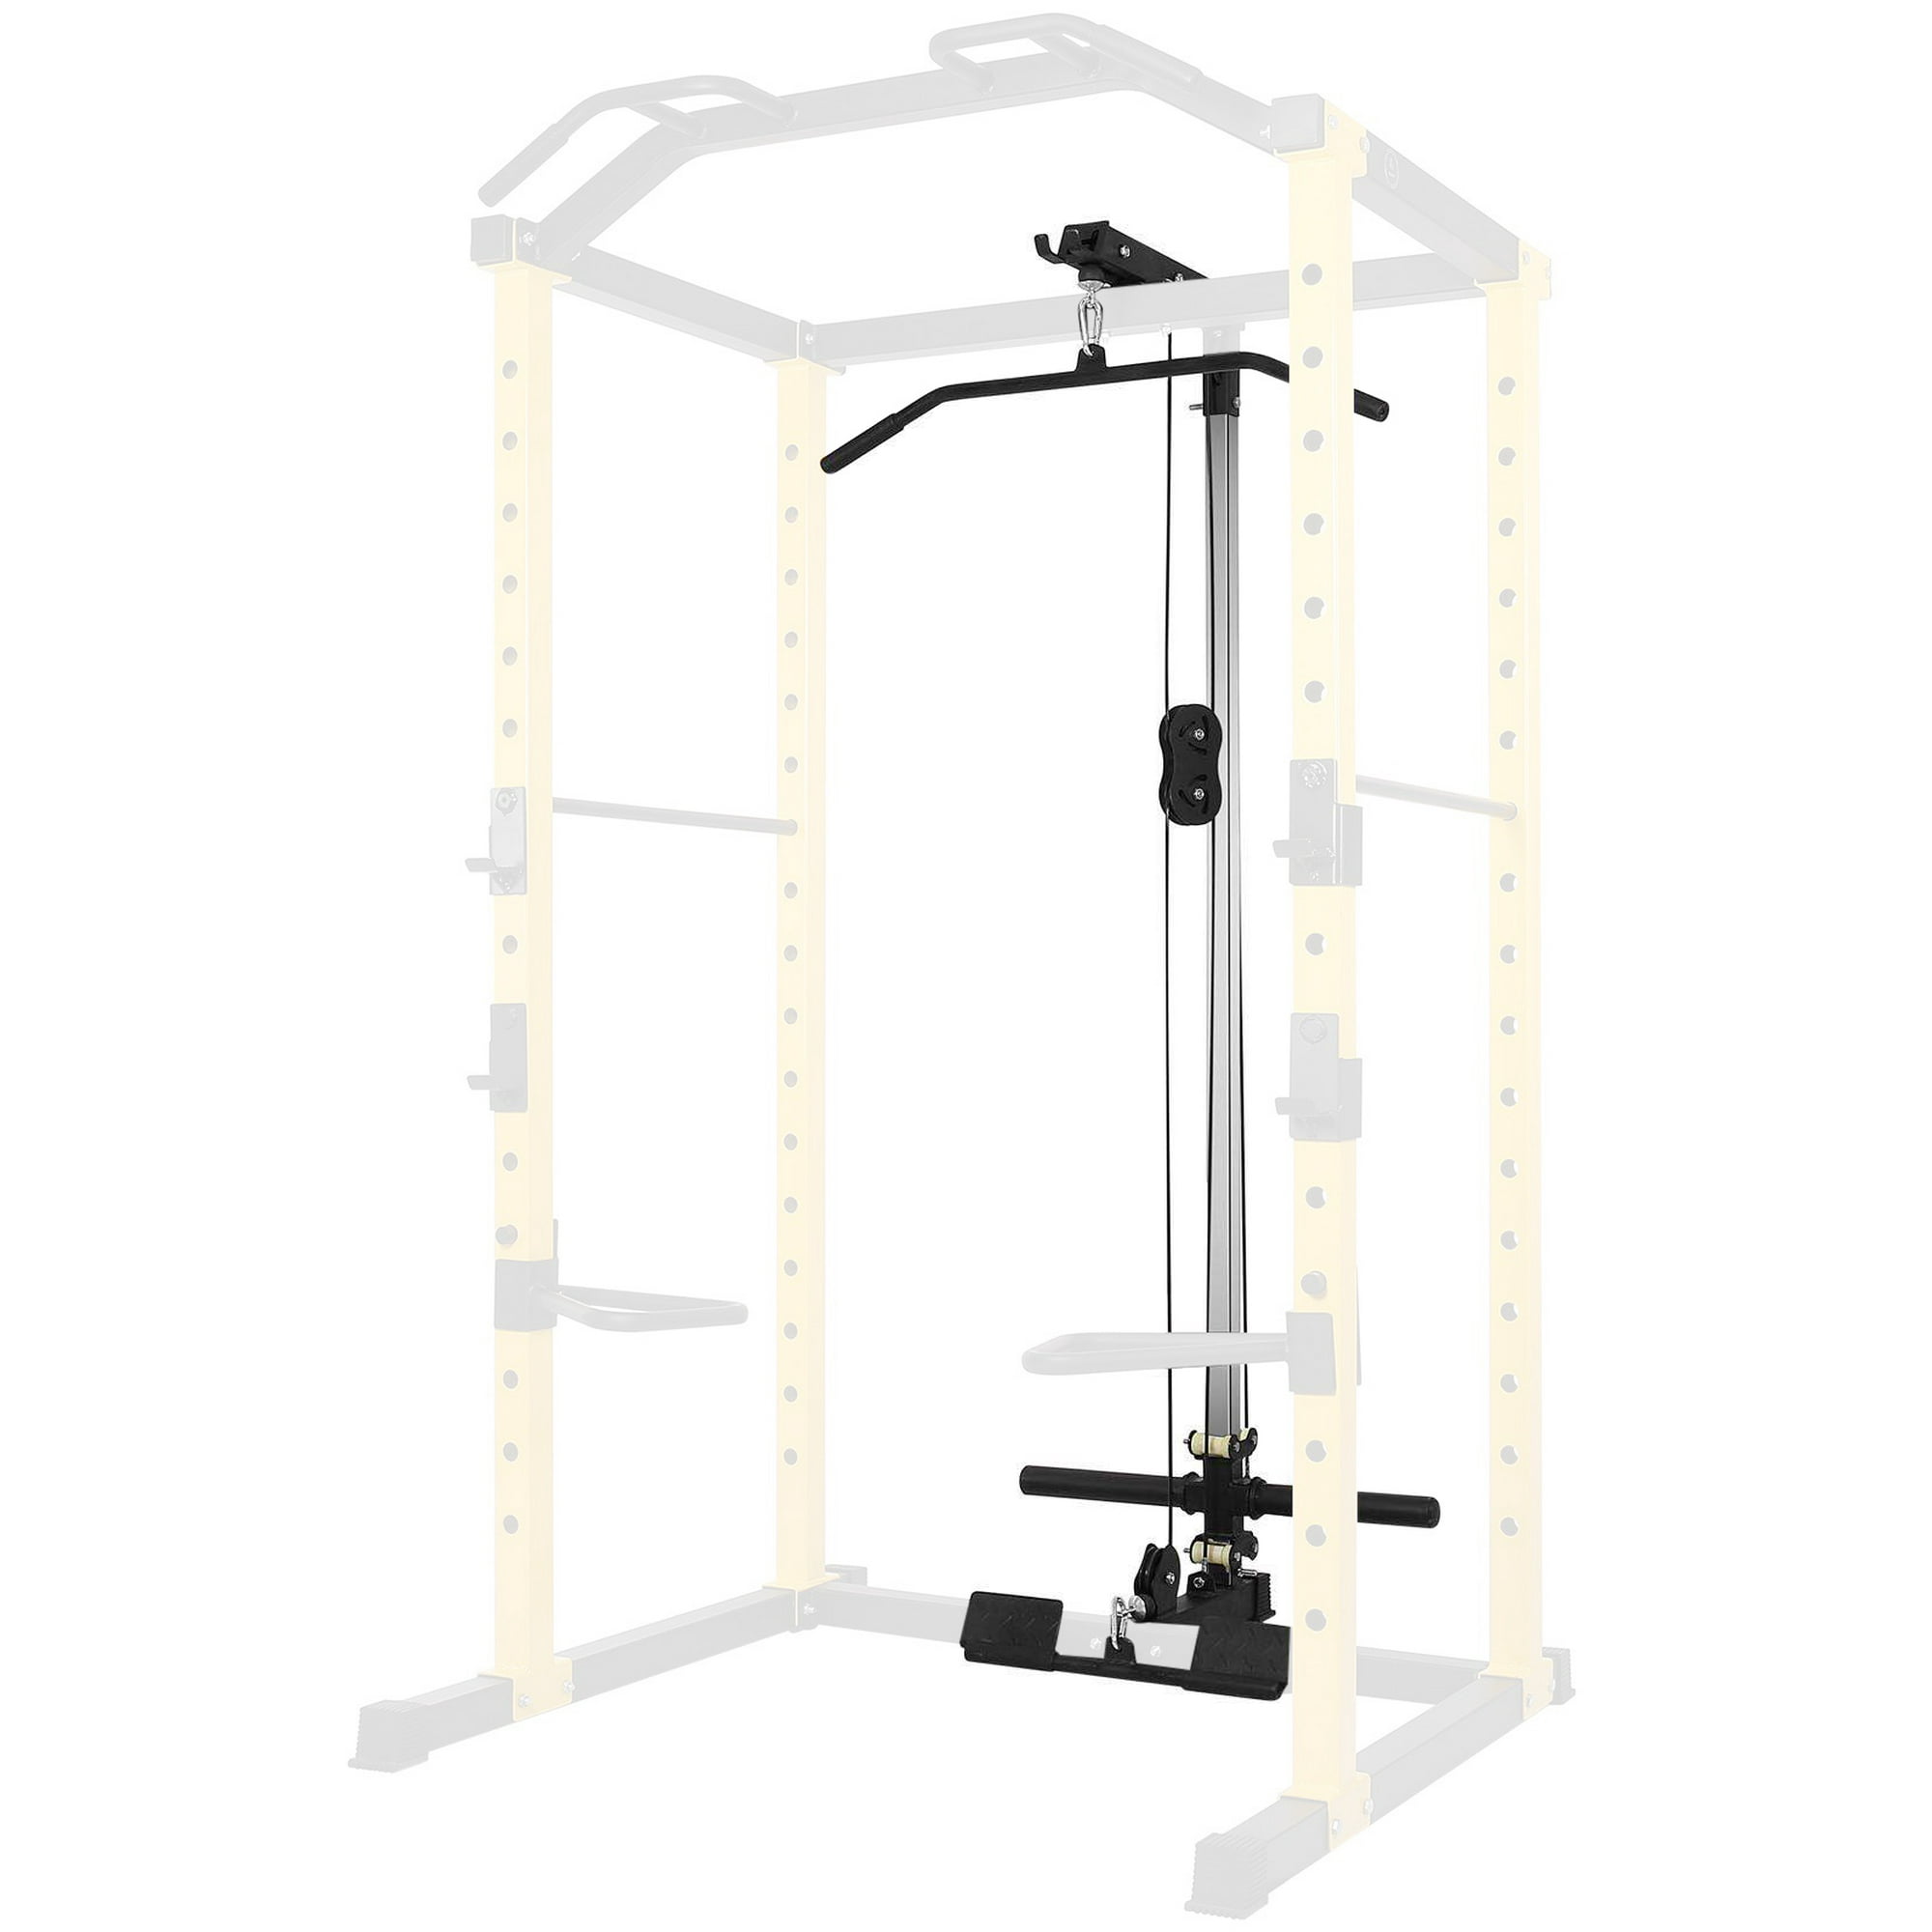 BalanceFrom Lat Pull-Down Attachment for PC-1 Series Squat Rack $75 Free Shipping